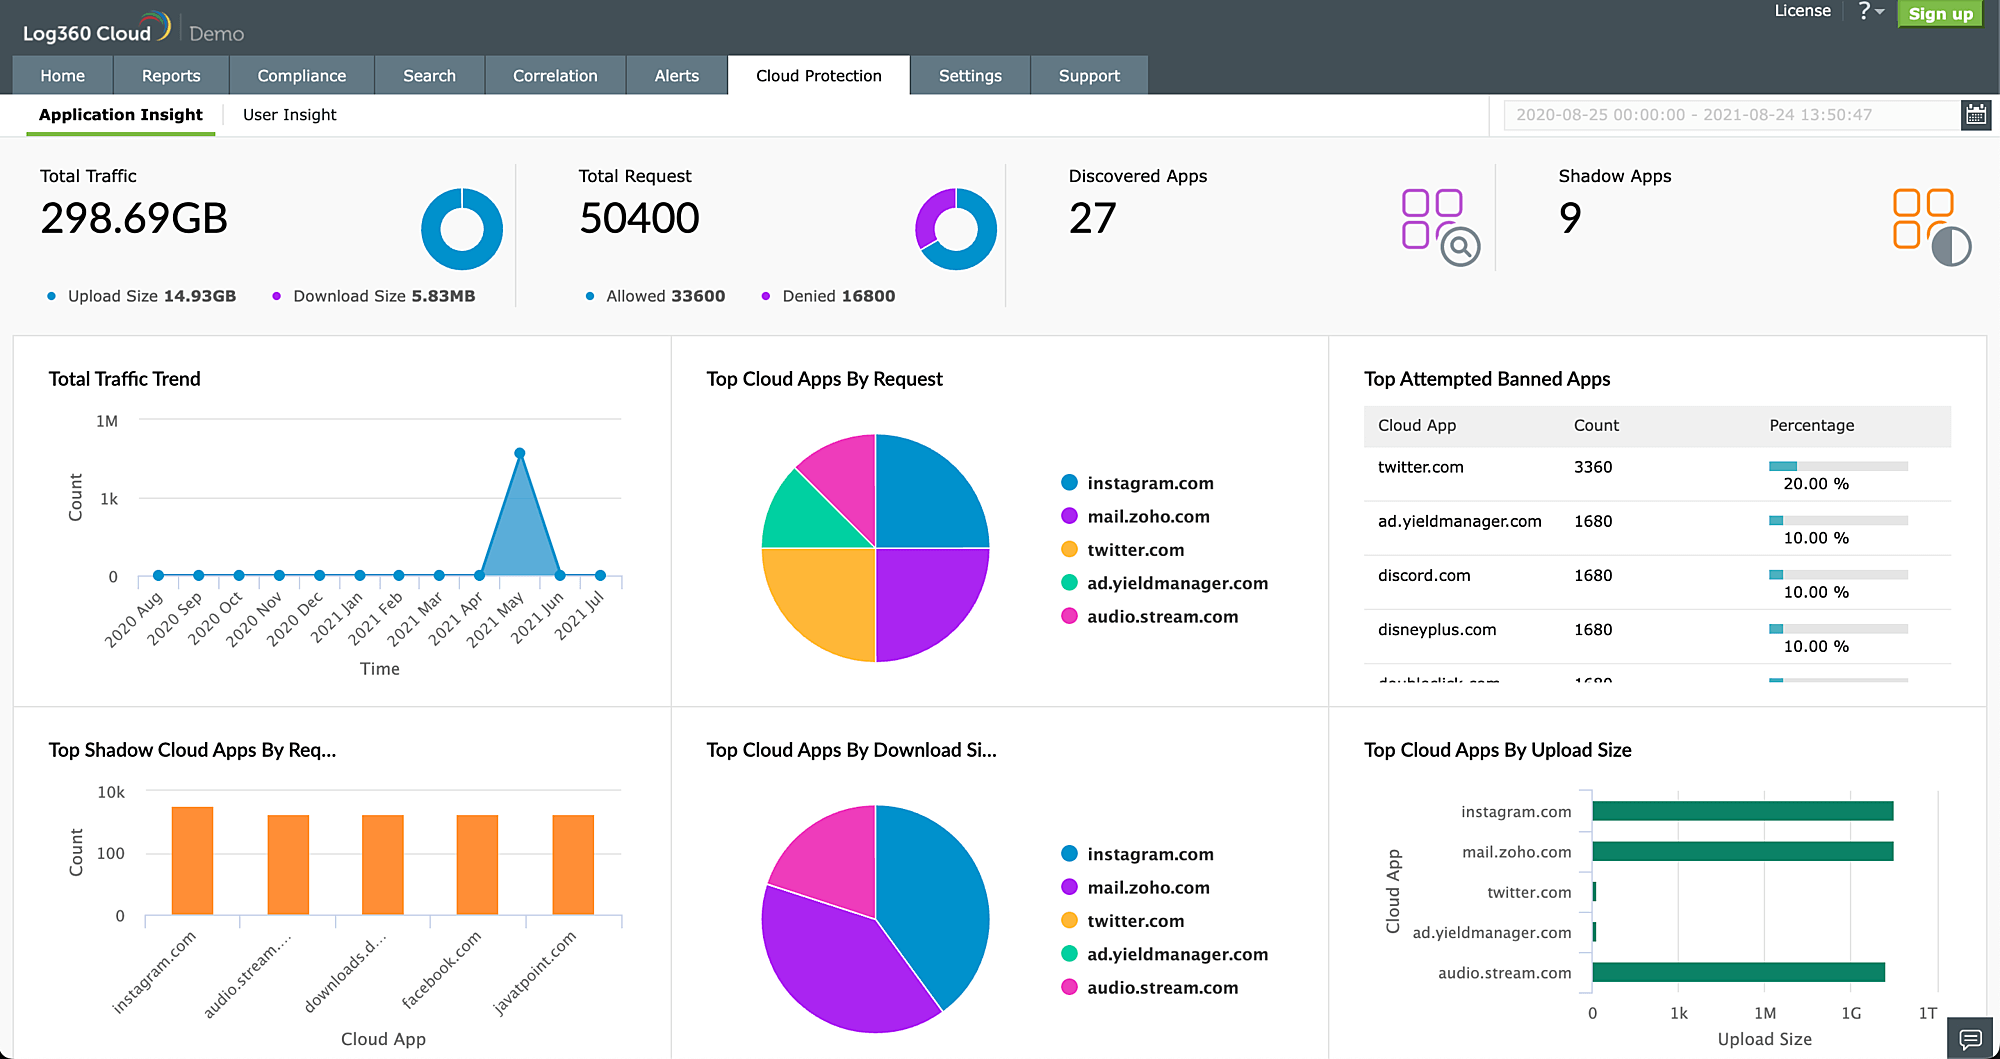 User Access Insights